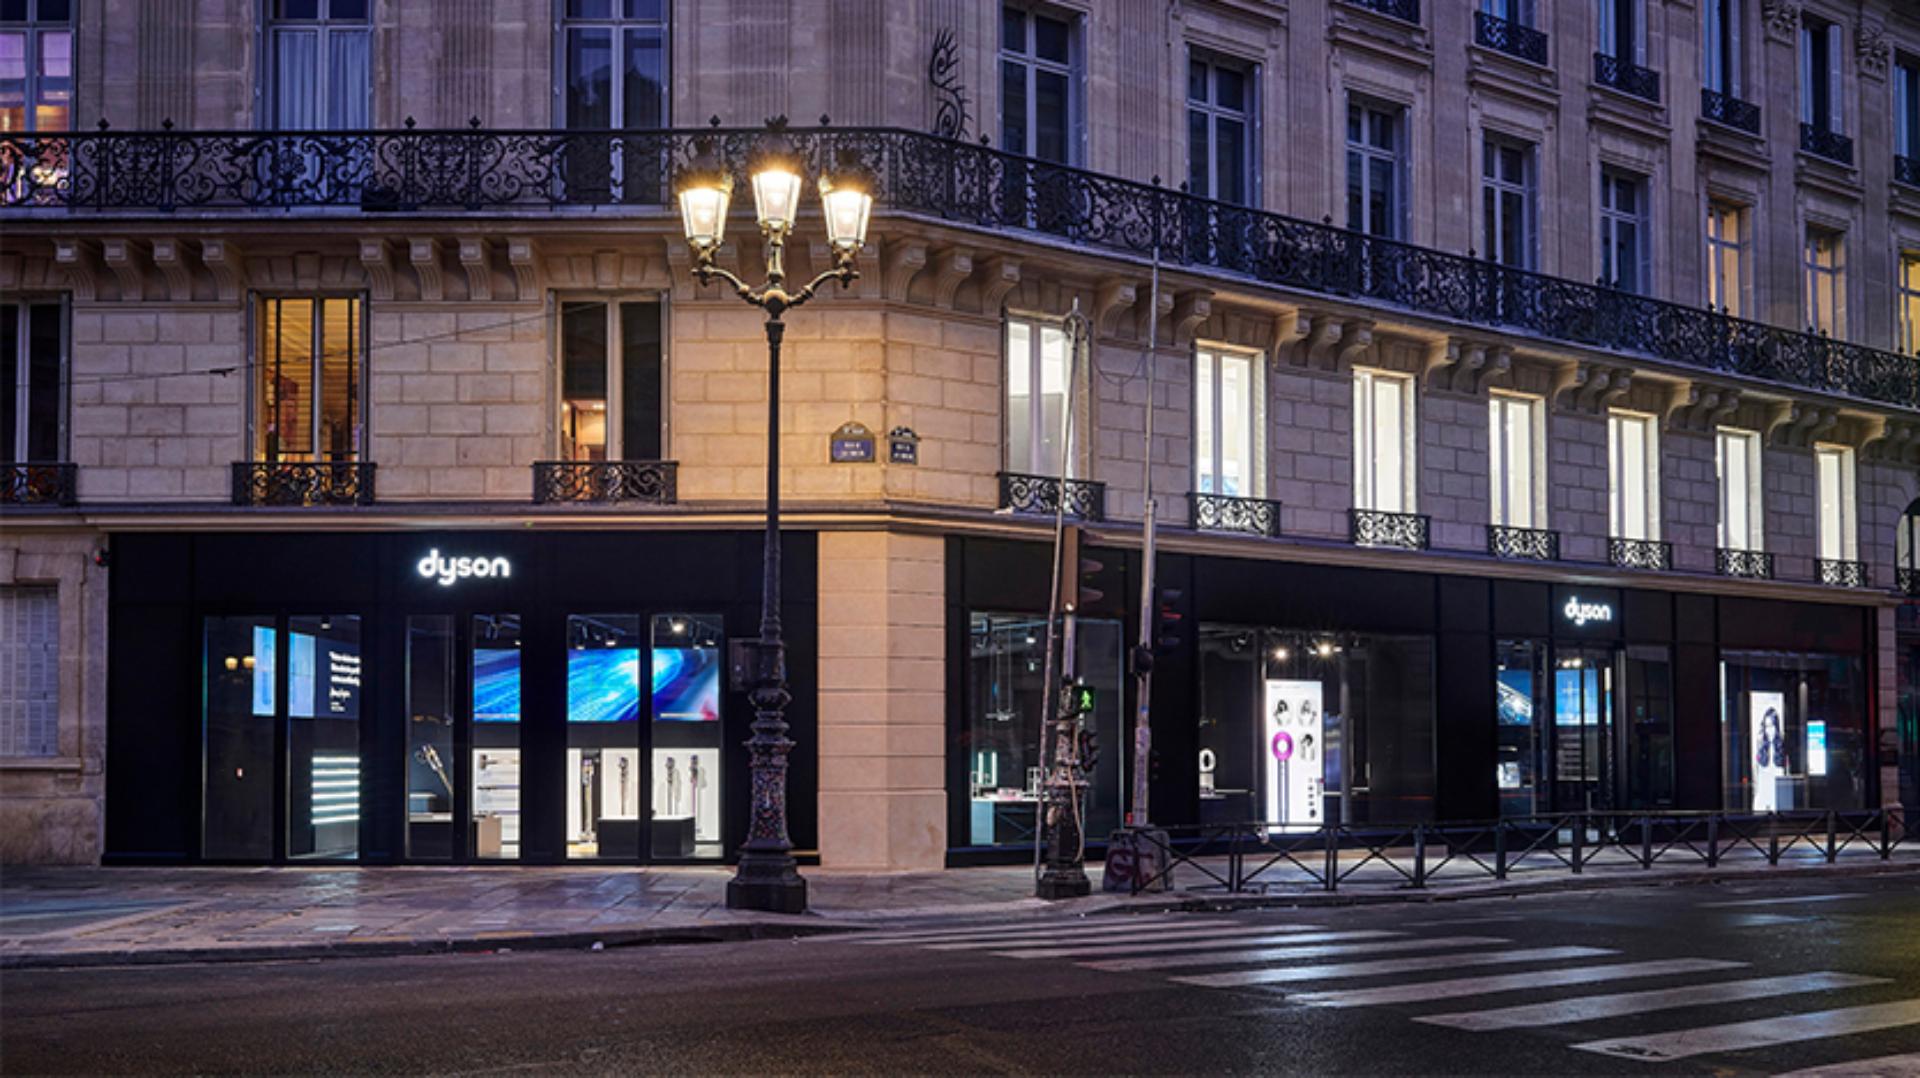 Exterior view of Dyson Demo Store in Paris